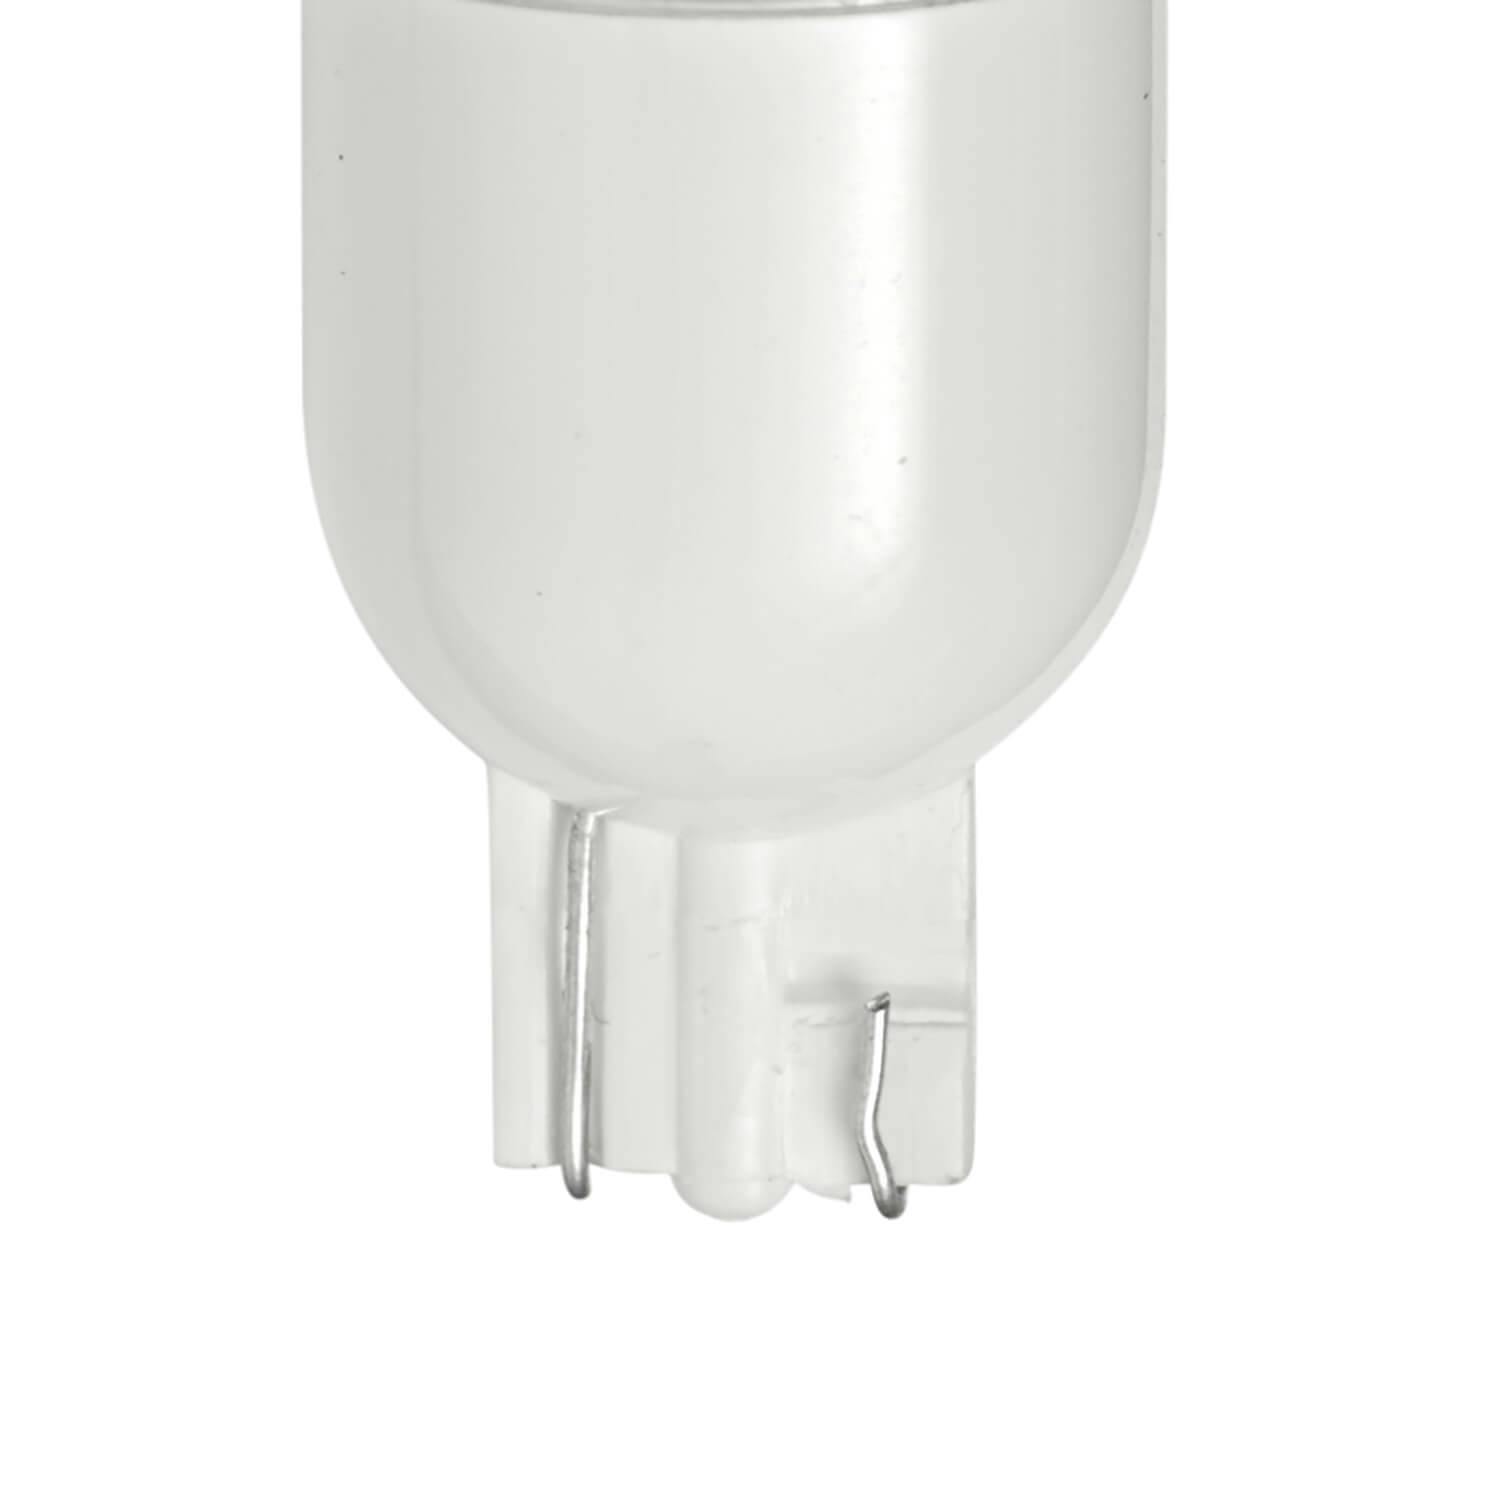 Contractor LED Lamps 2700K T5 230LM 300Deg Omni-Directional on a white background